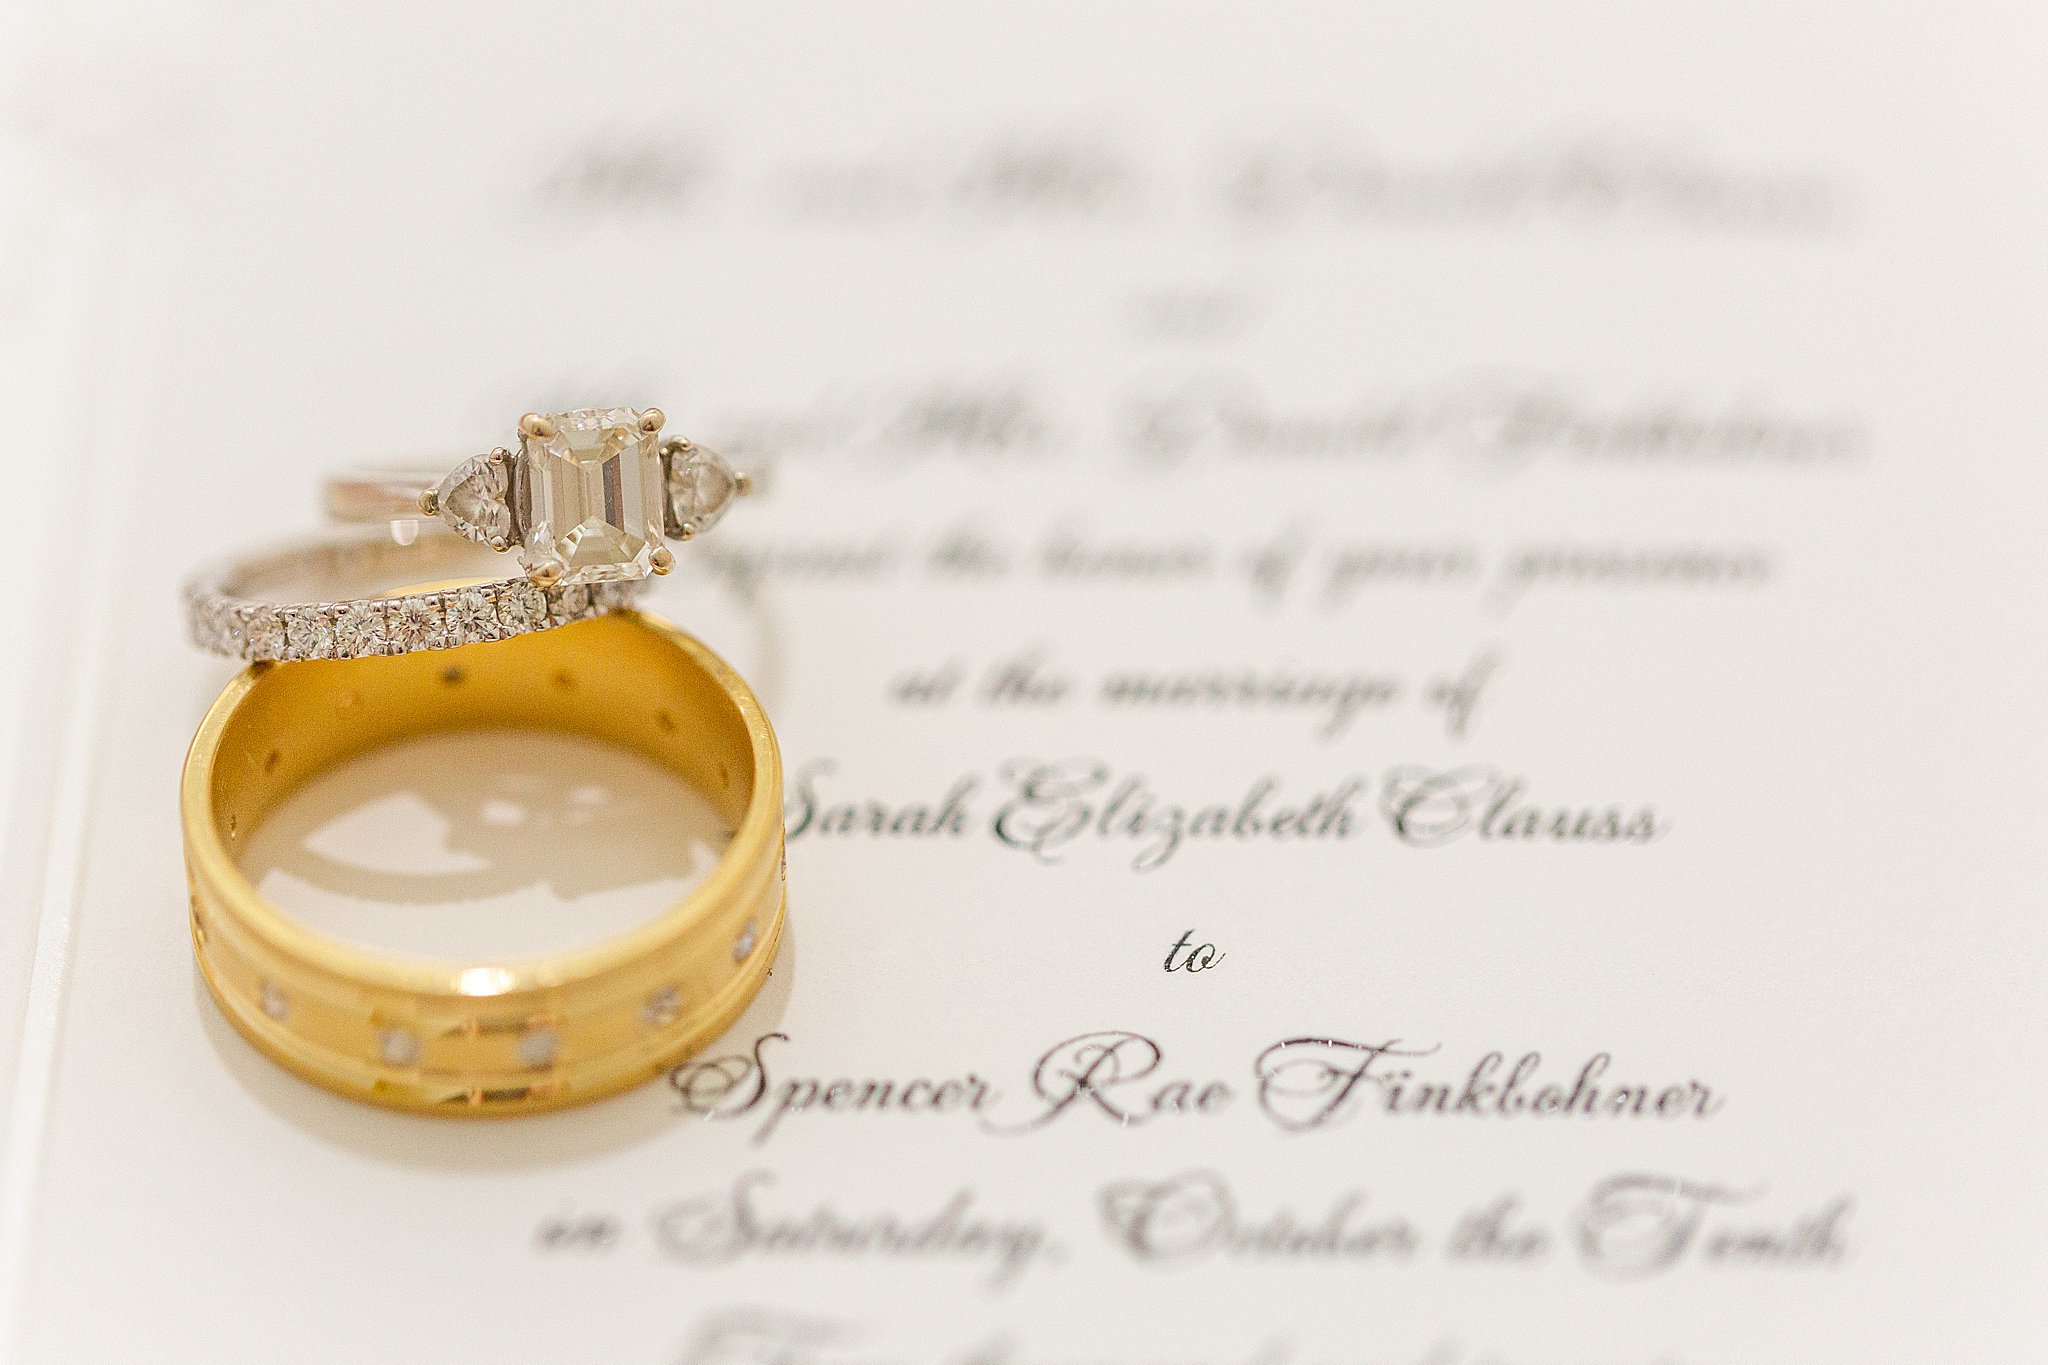 wedding rings and invitation detail photo 